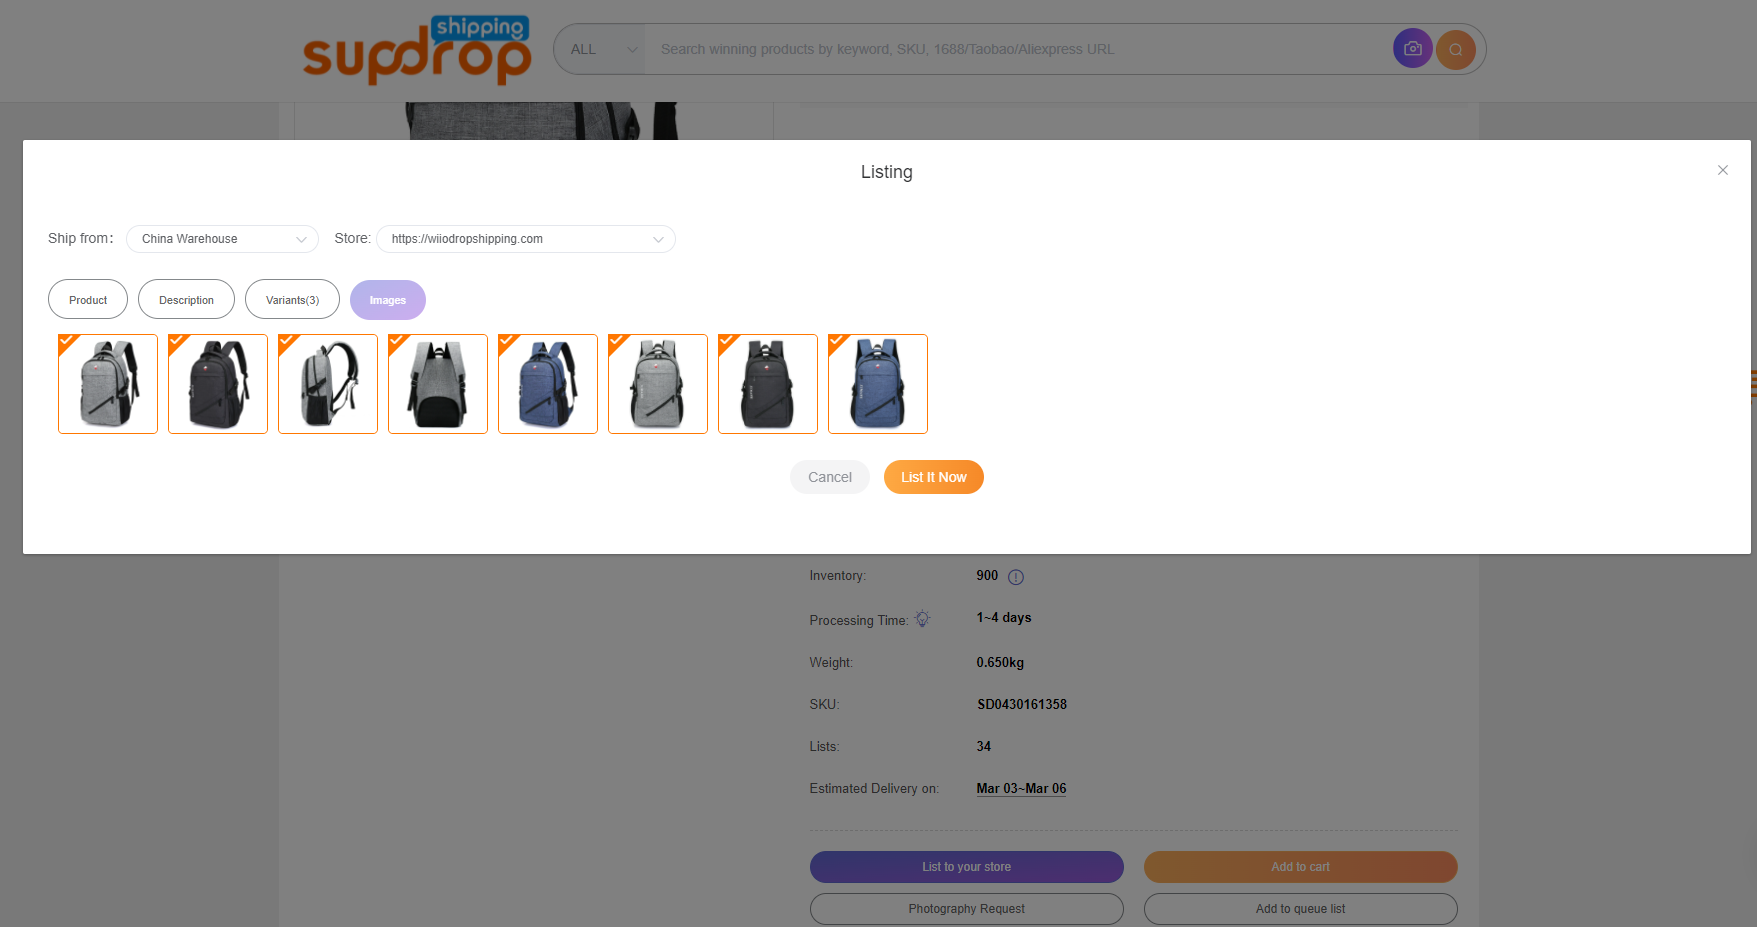 Listing products from suppliers to your store